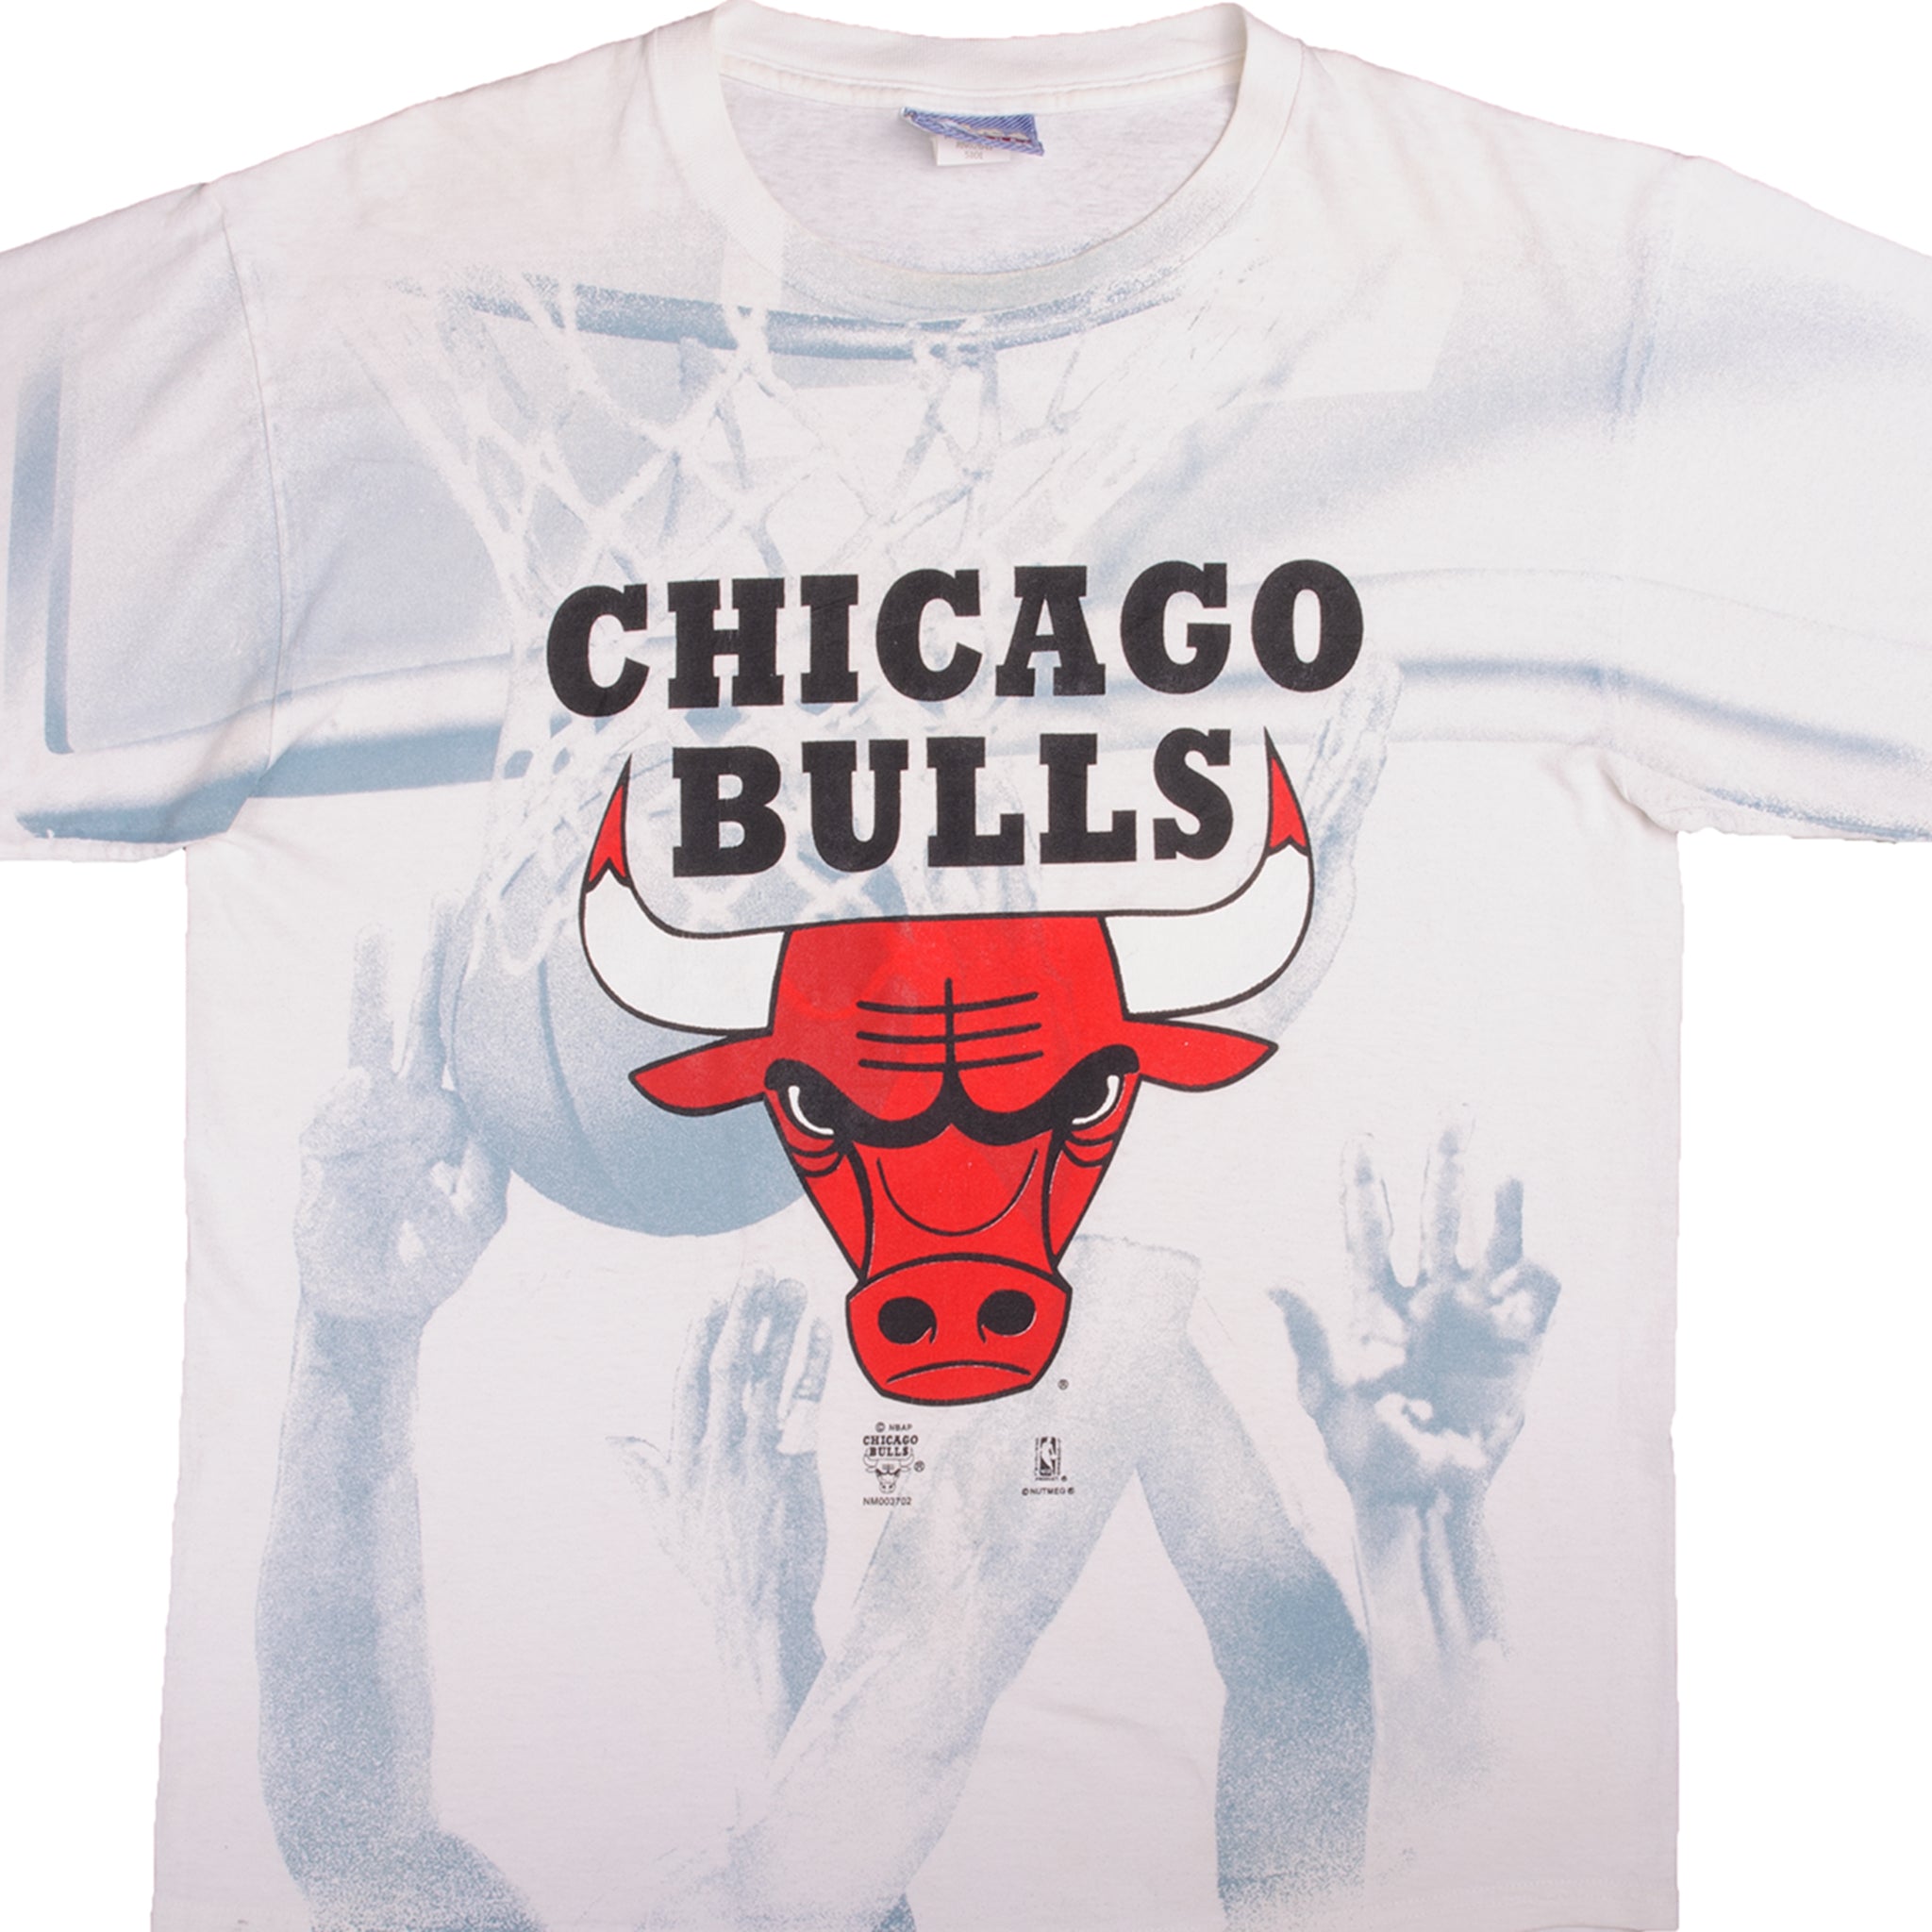 VINTAGE ALL OVER PRINT NBA CHICAGO BULLS TEE SHIRT 1990s SIZE LARGE MADE IN  USA